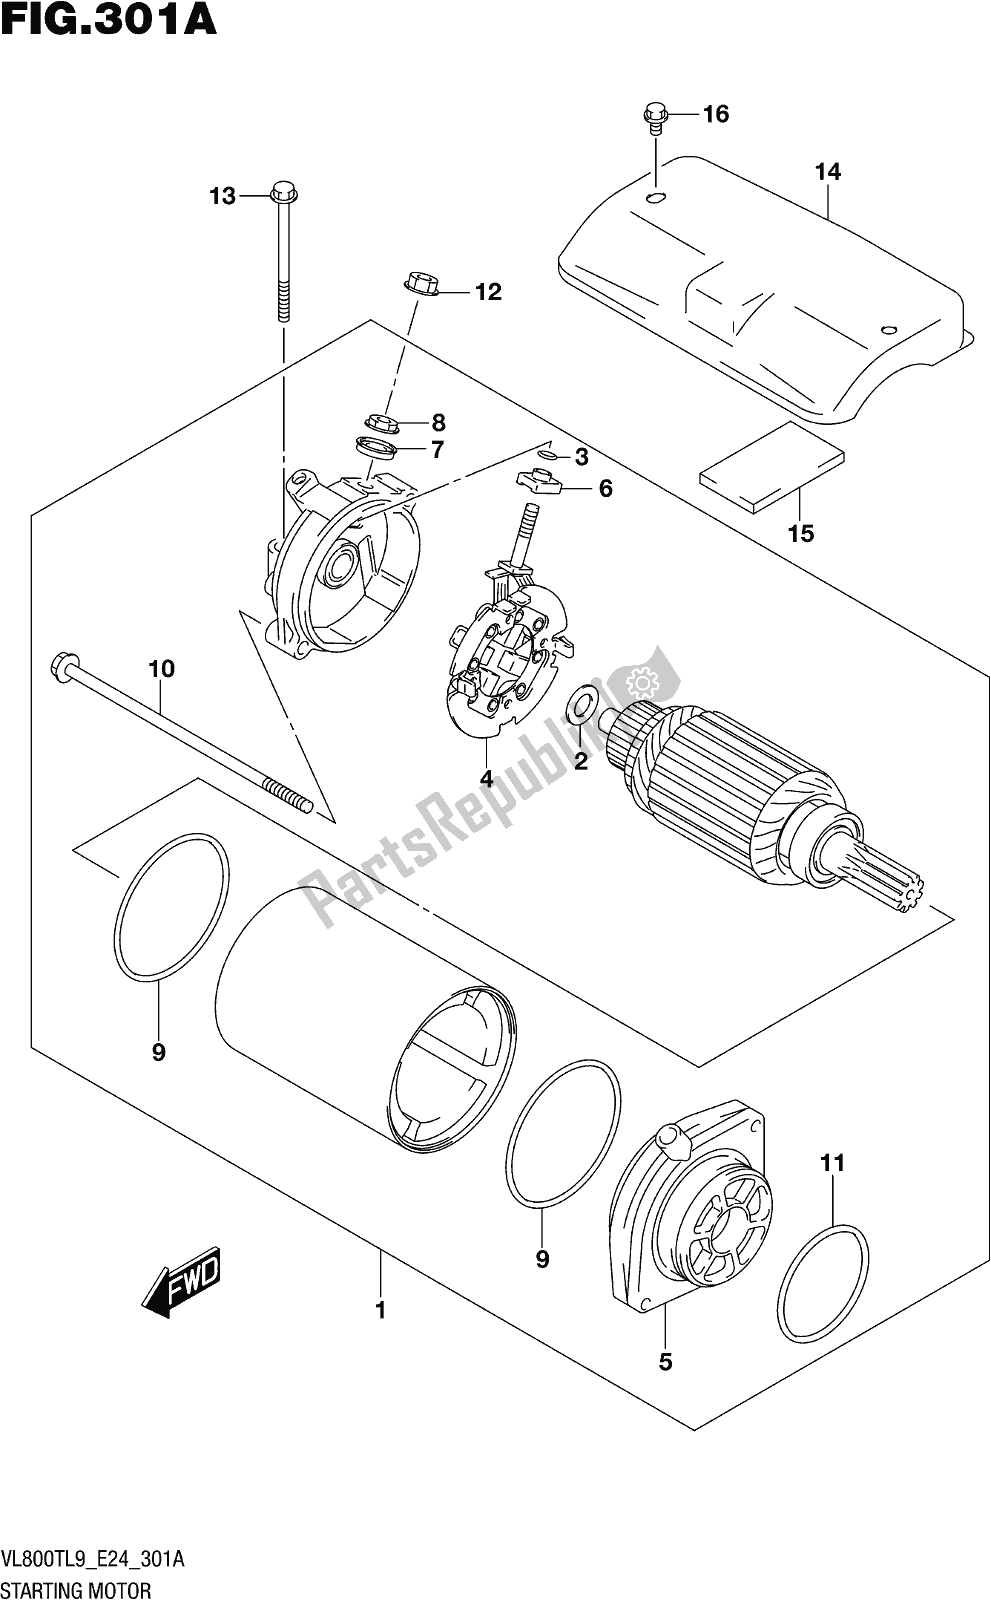 All parts for the Fig. 301a Starting Motor of the Suzuki VL 800T 2019